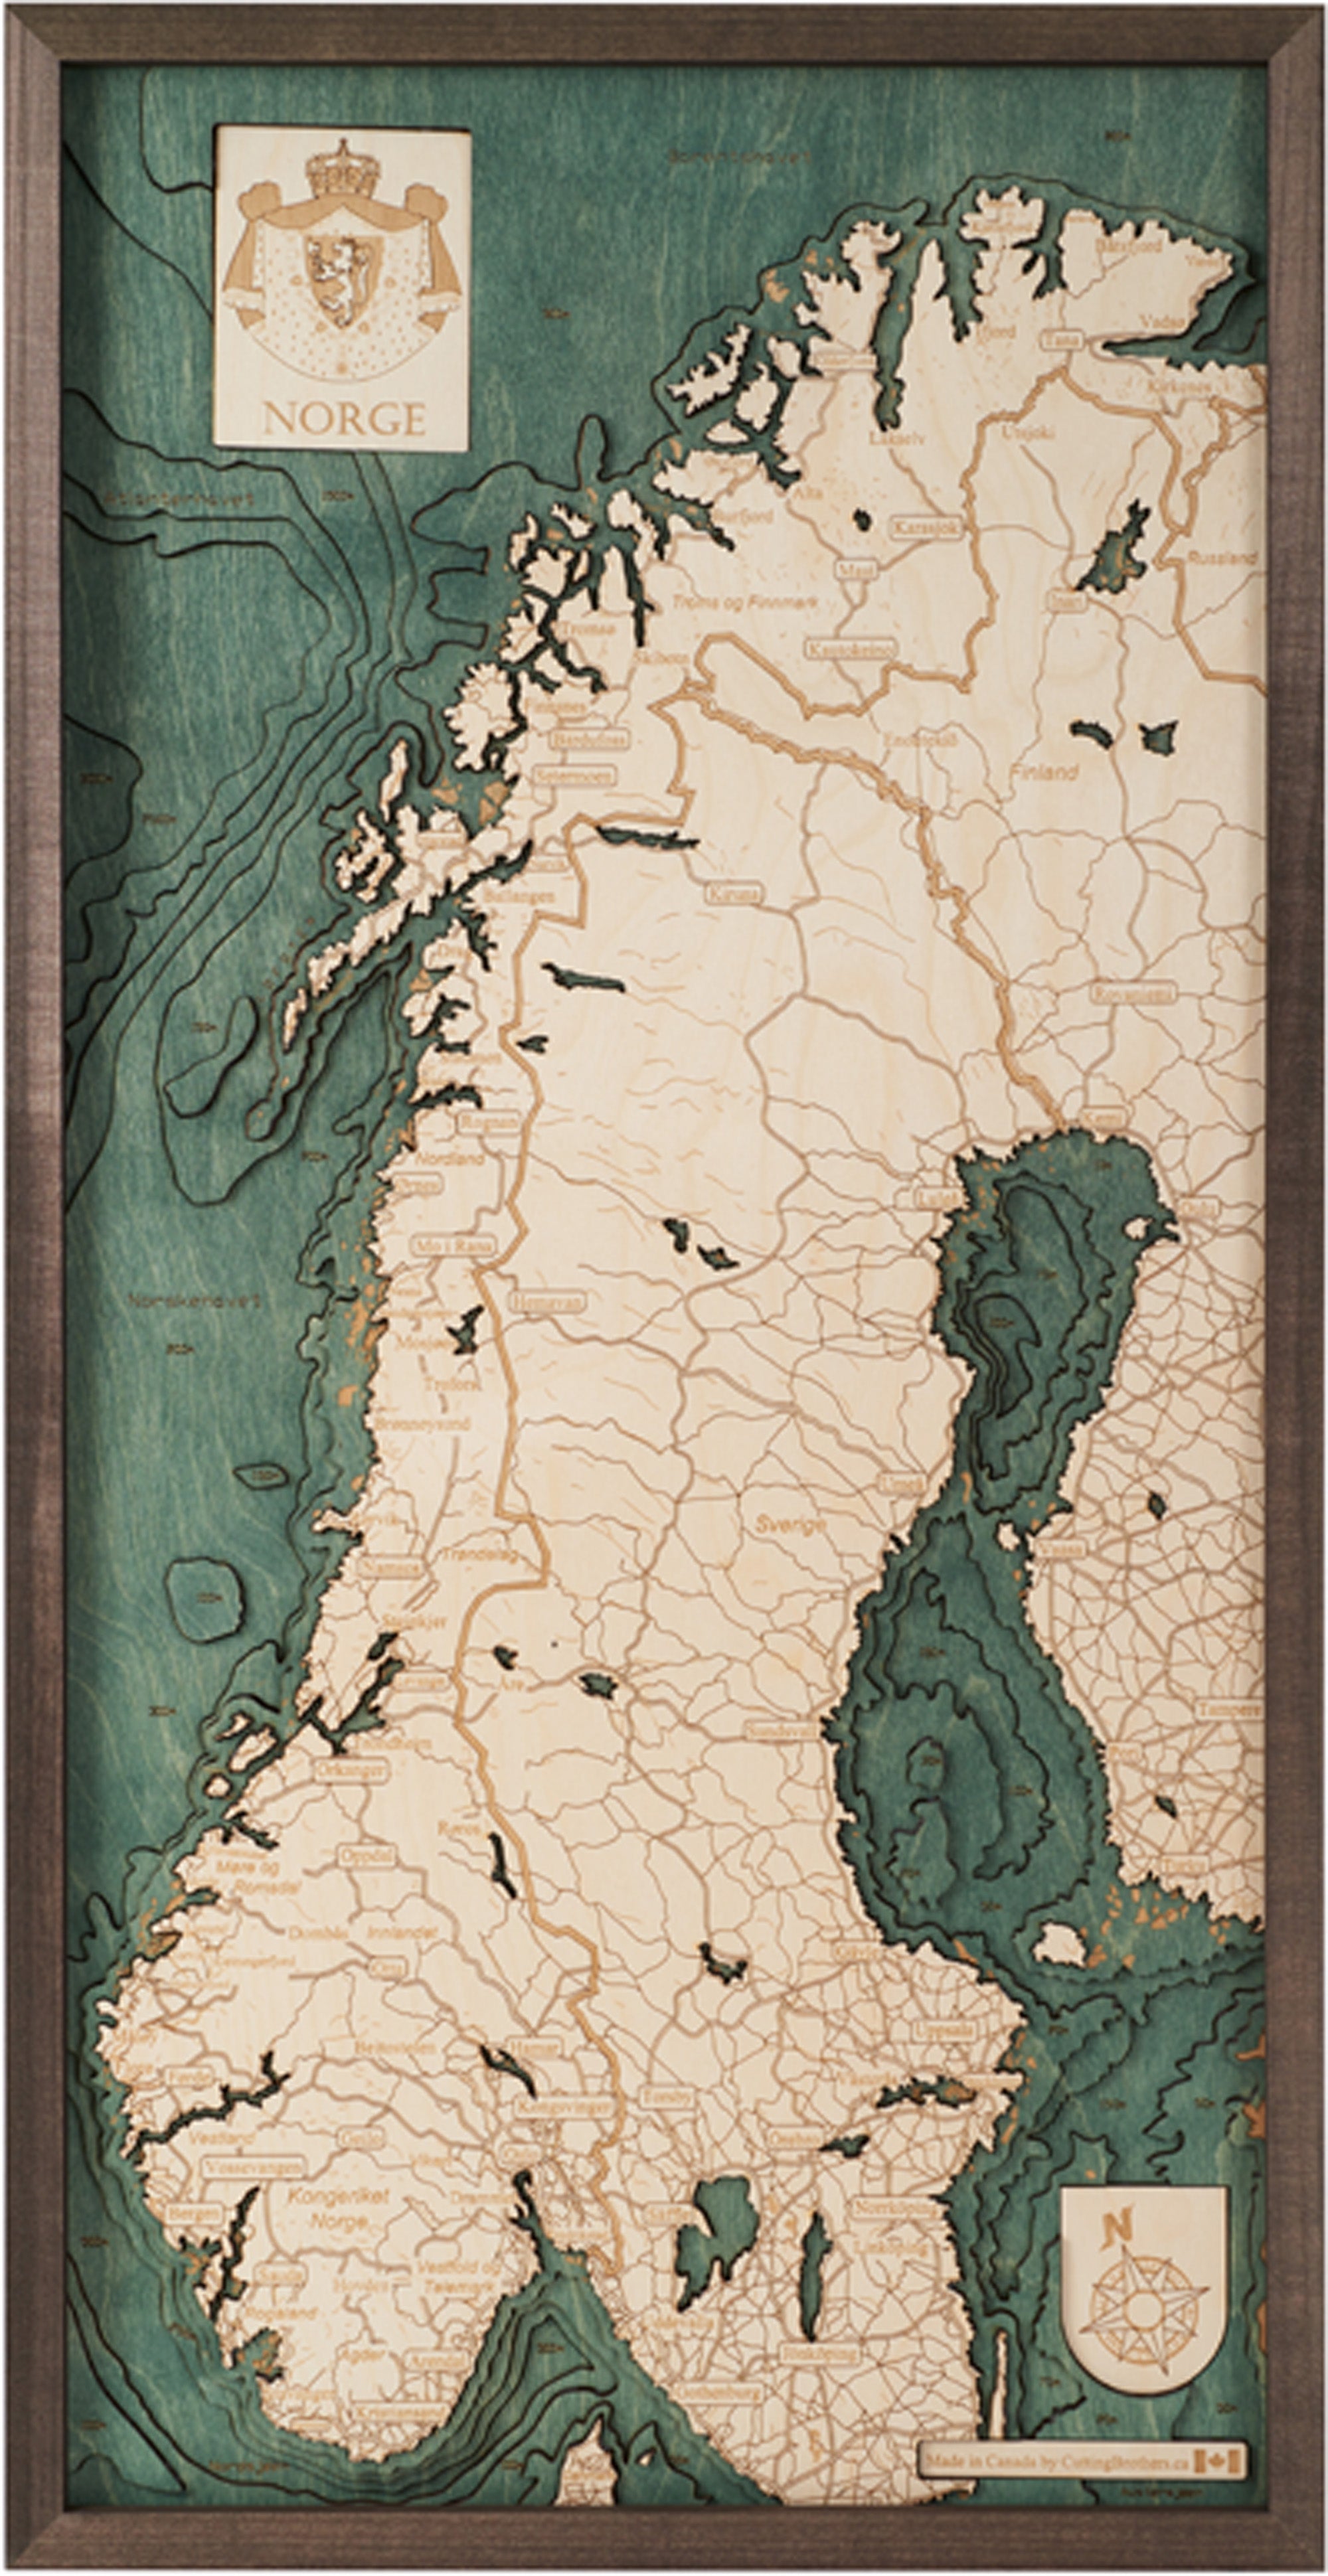 NORWAY 3D Wooden Wall Map - Version M 